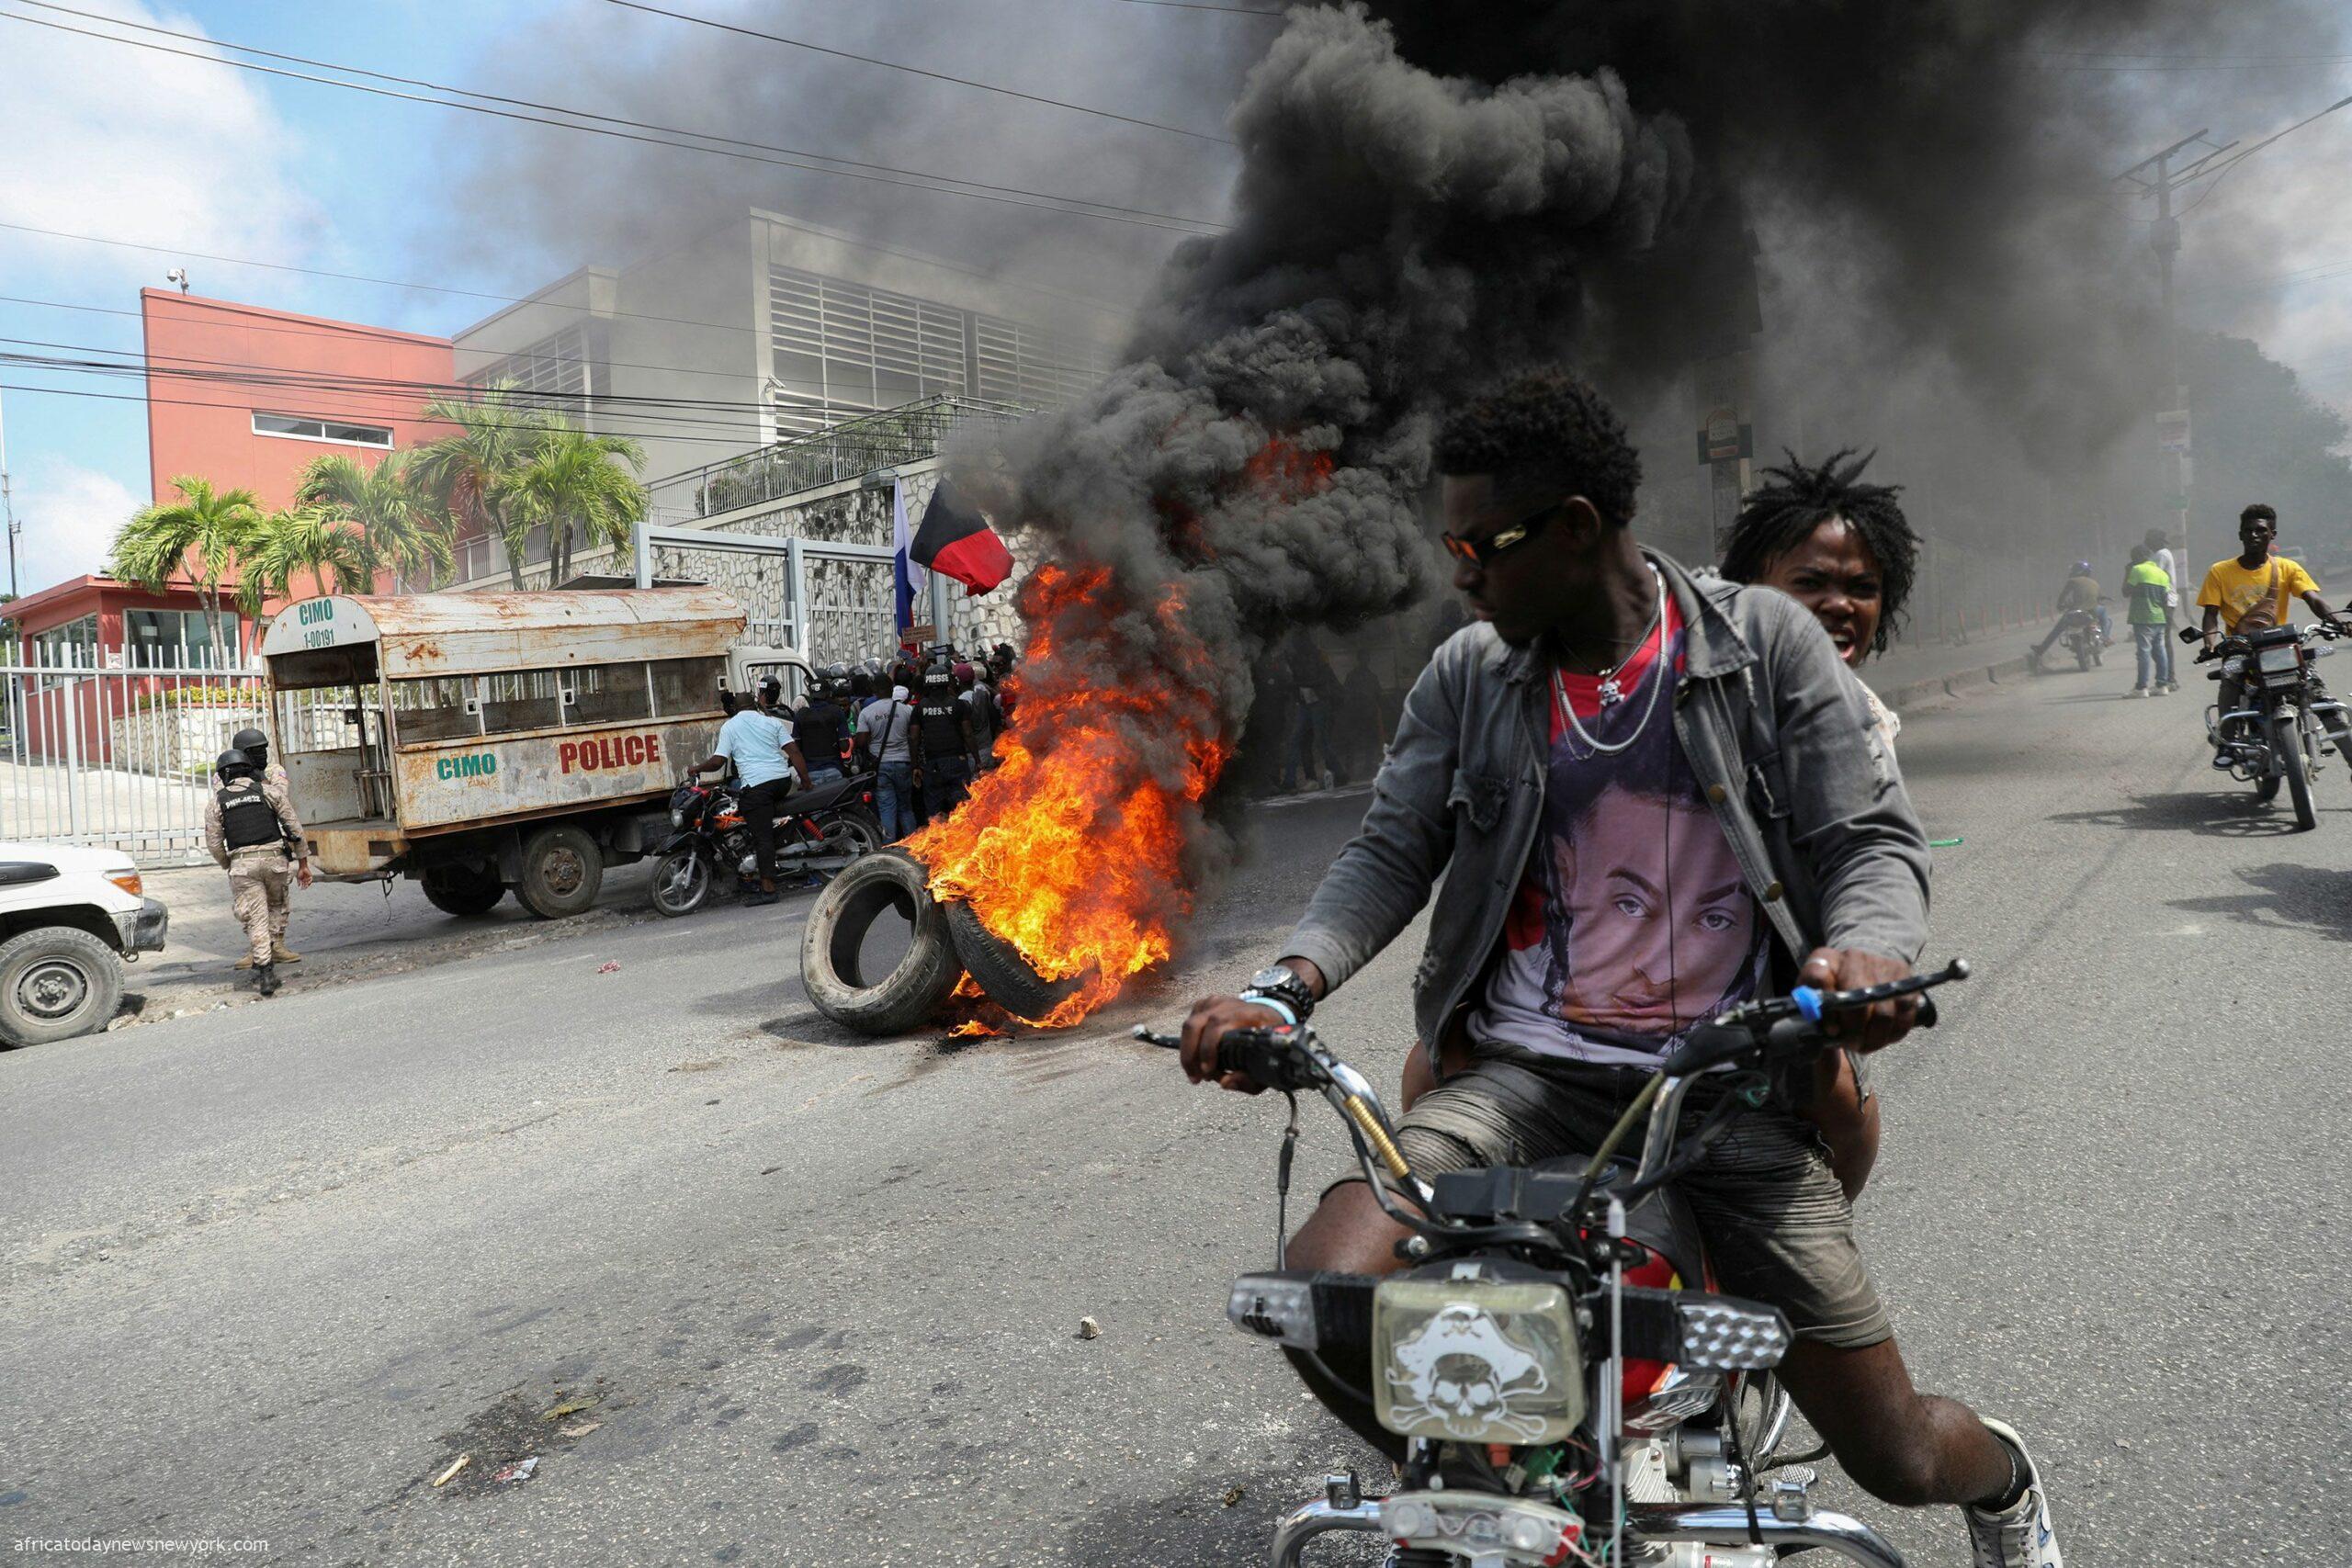 Haiti: Gangs Engage In Fresh Confrontation With Authorities